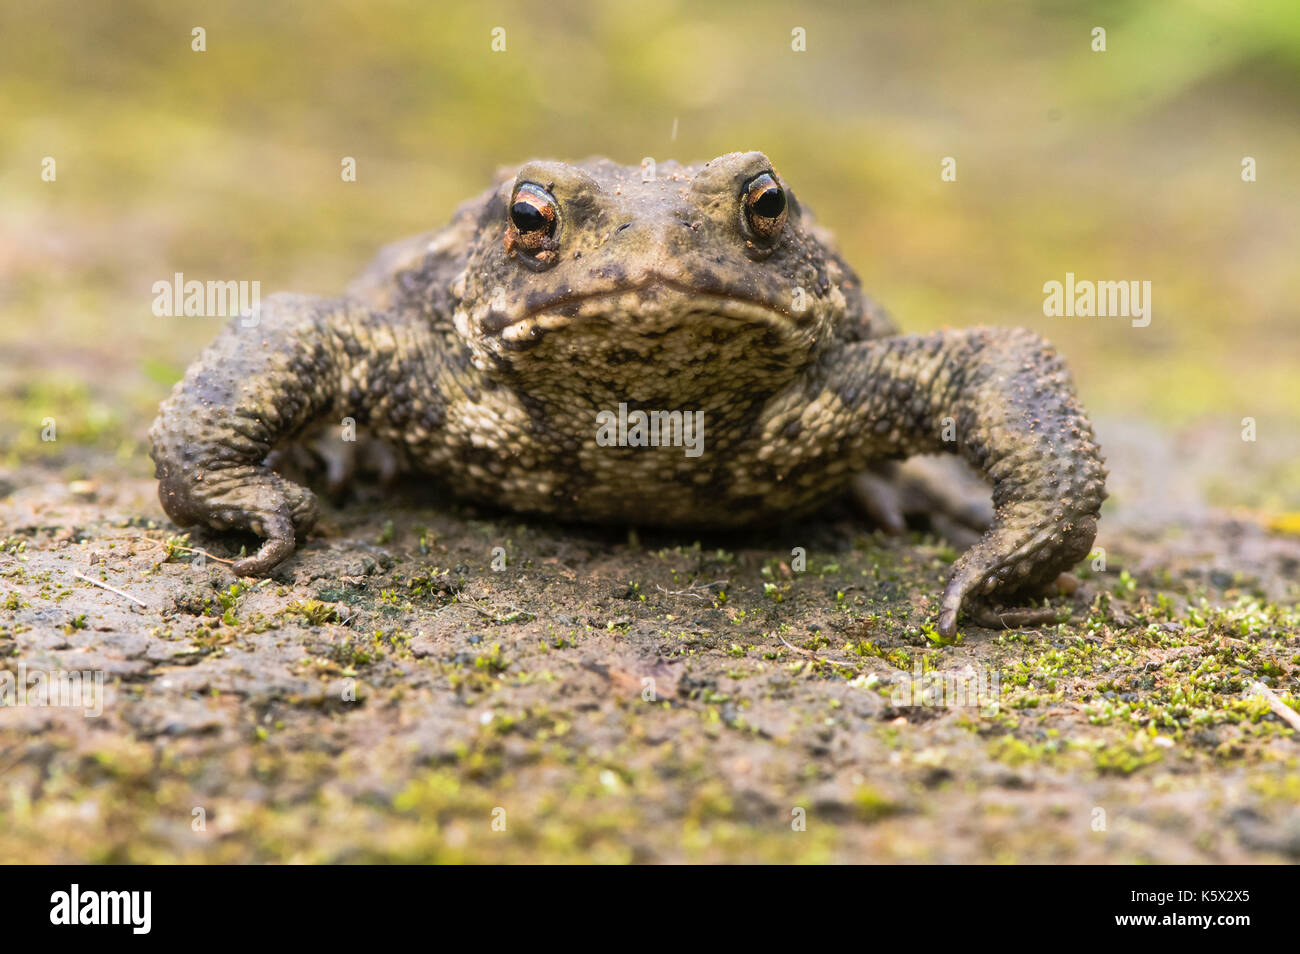 Common toad (Bufo bufo) head on. Amphibian in the family Bufonidae looking directly at camera Stock Photo